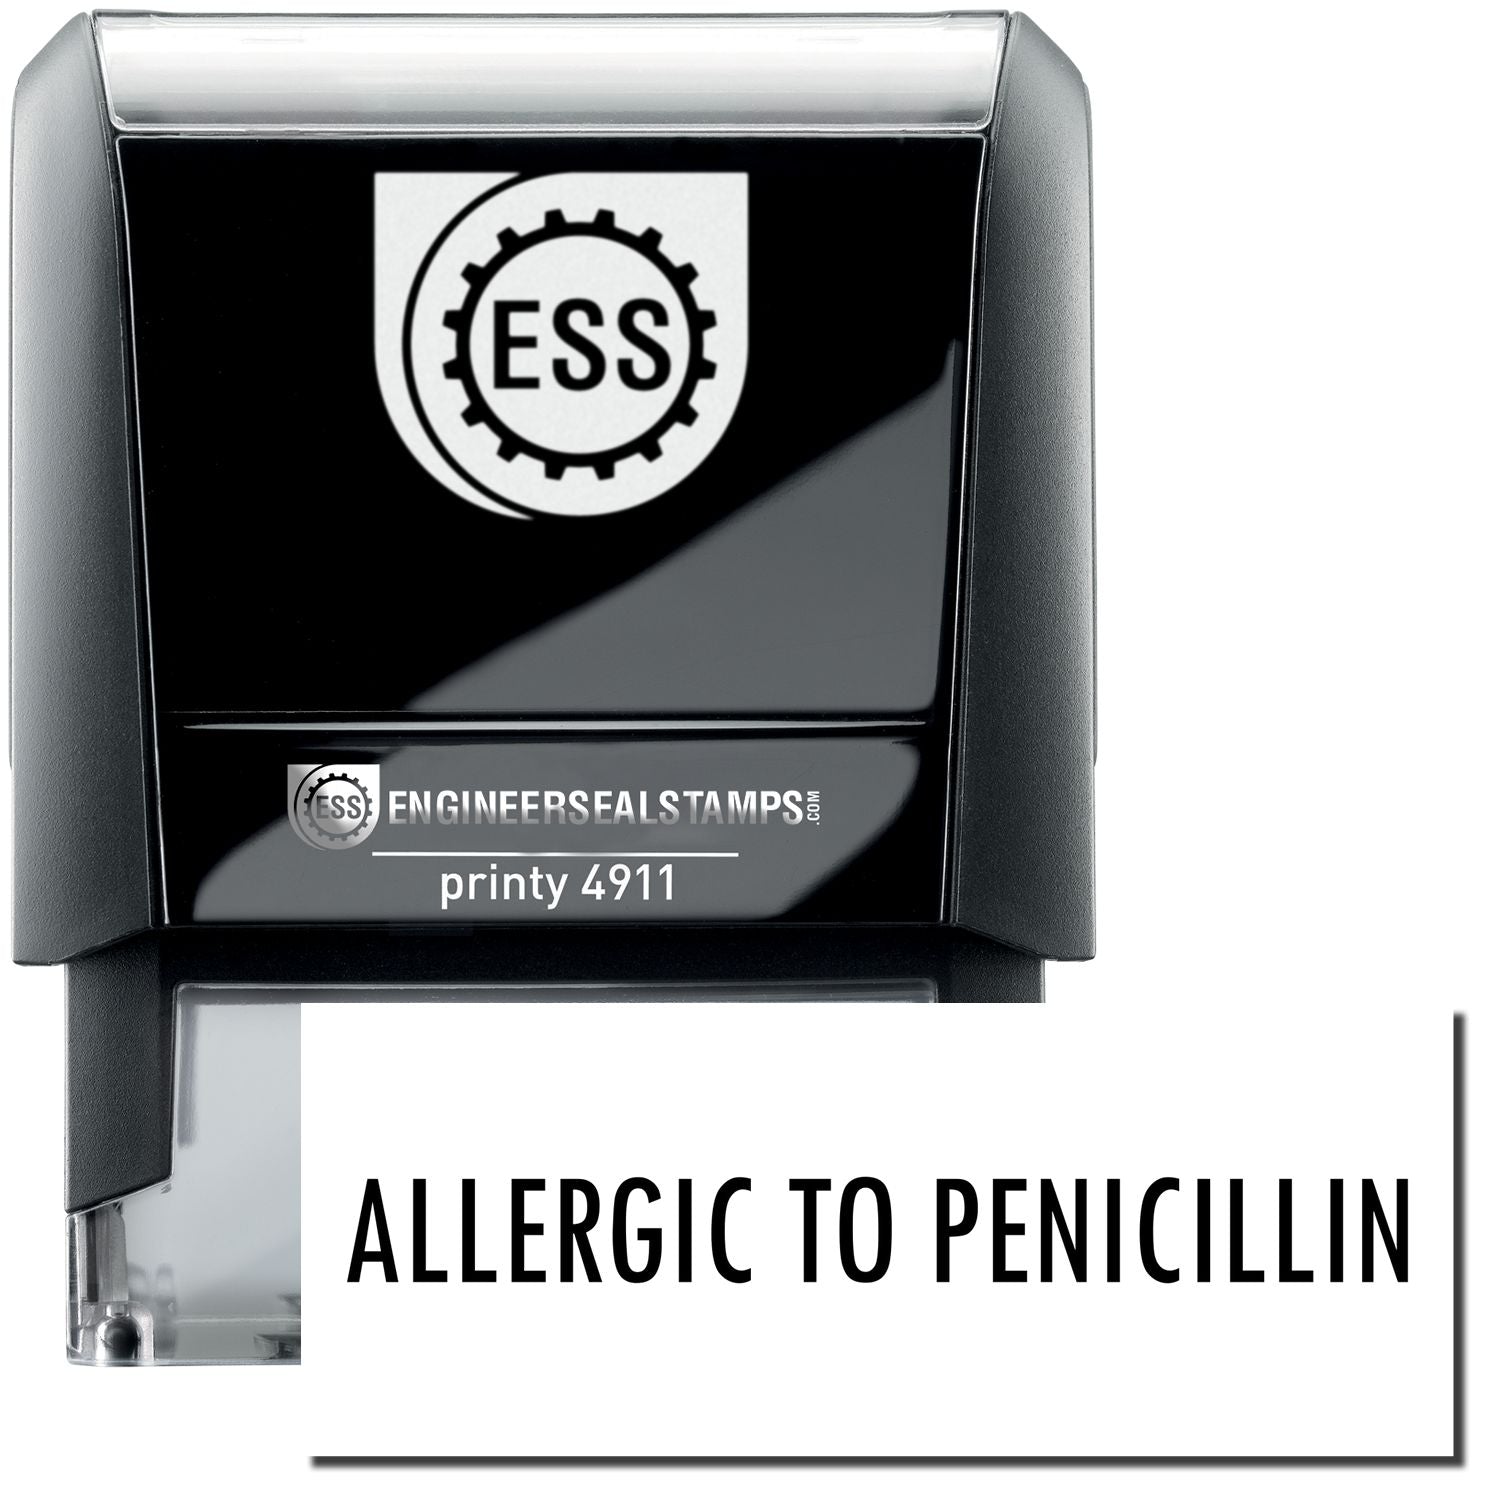 A self-inking stamp with a stamped image showing how the text "ALLERGIC TO PENICILLIN" is displayed after stamping.